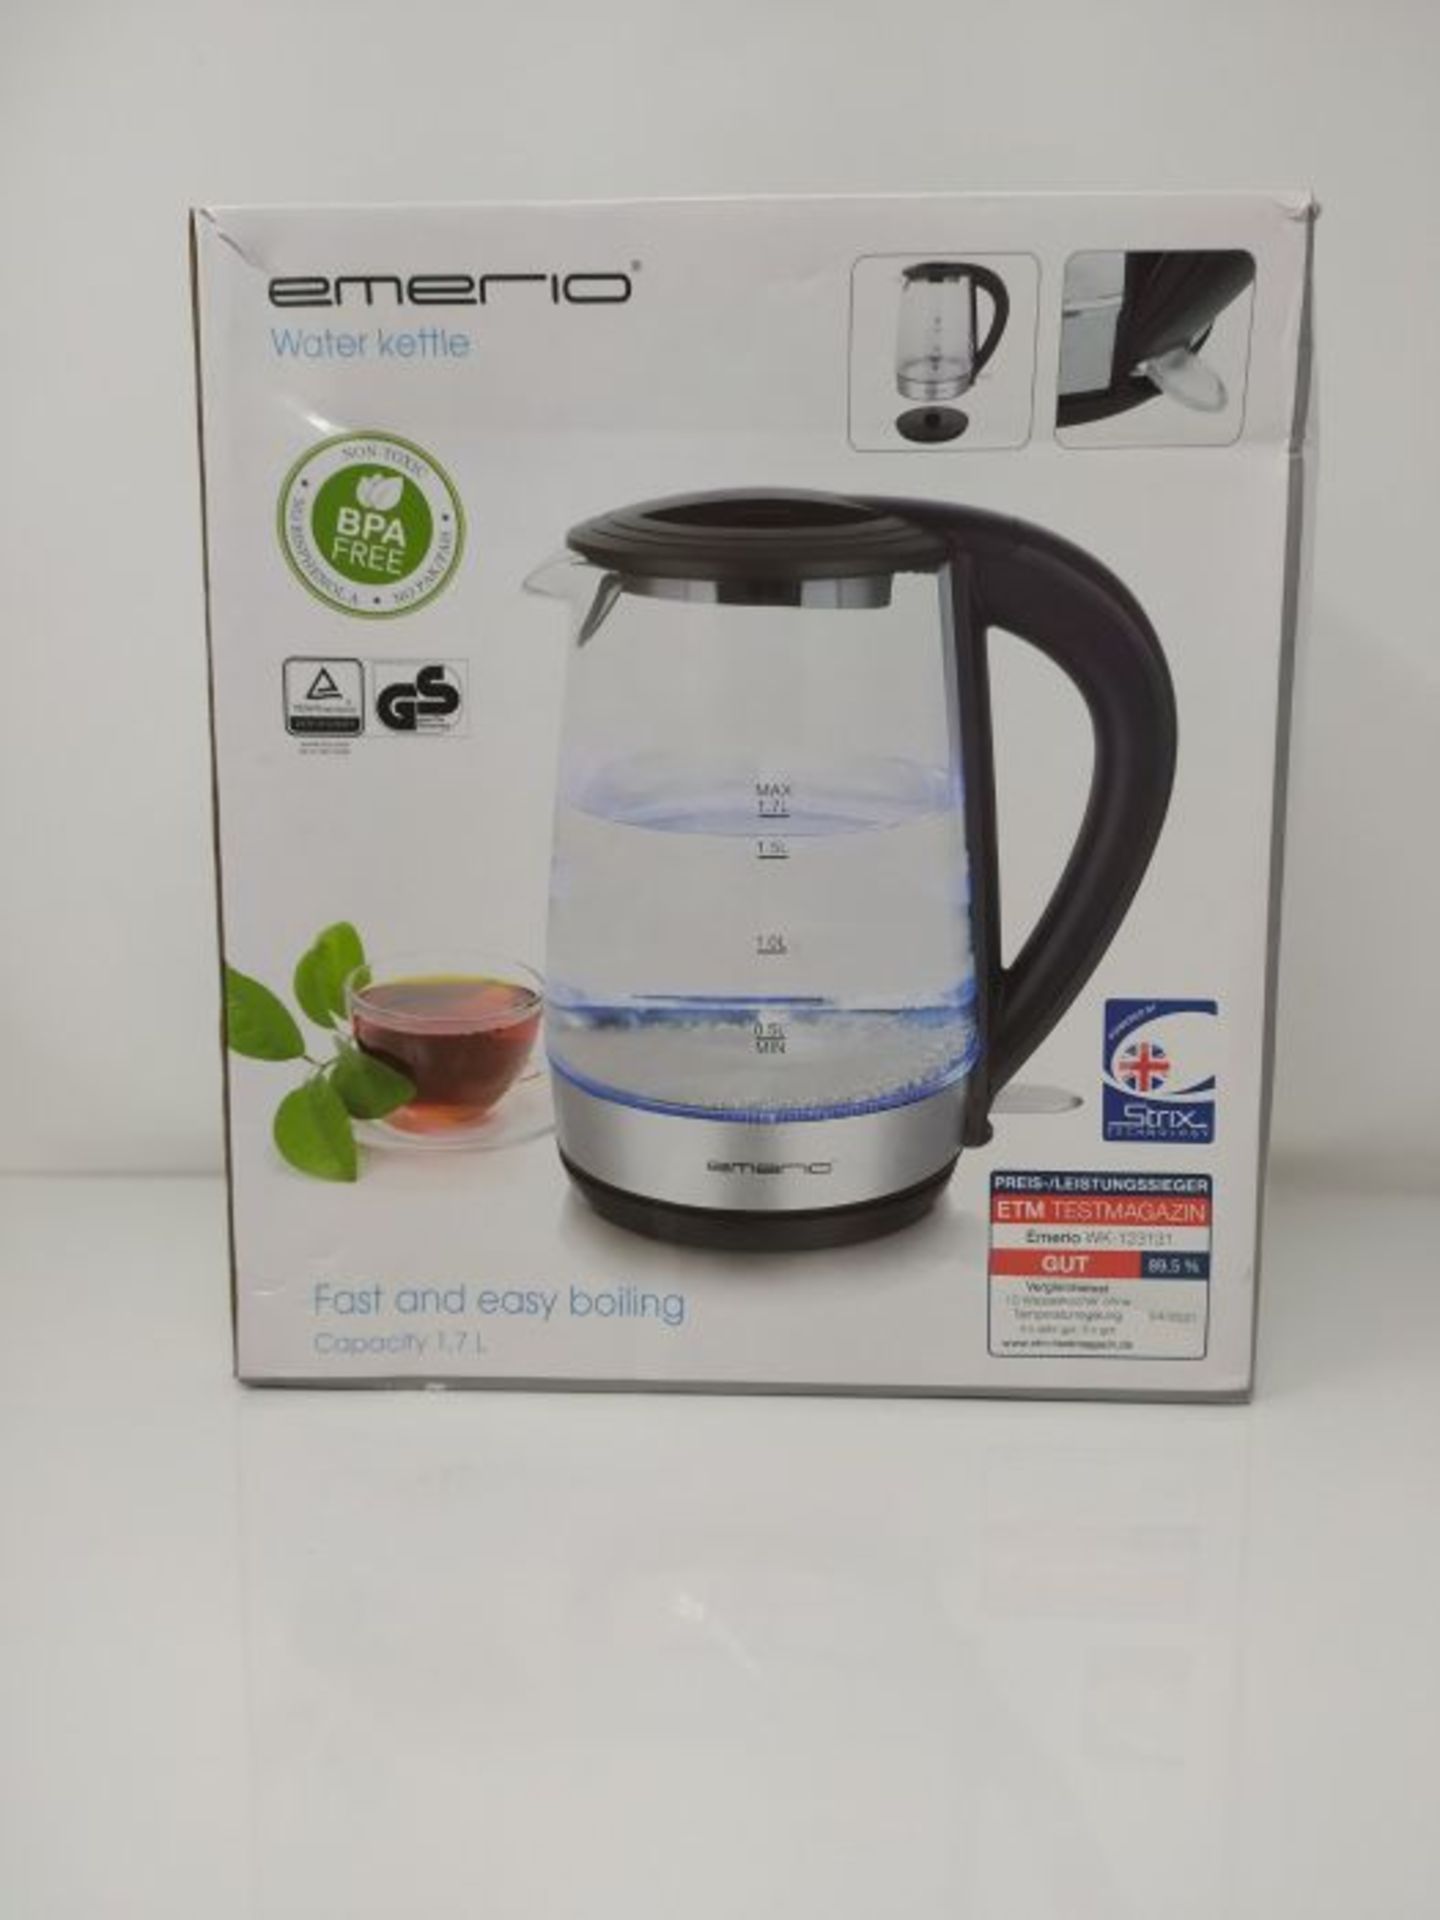 Emerio WK-123131 Glass electric kettle 1.7L 2200W Stainless steel/Black - Image 2 of 3